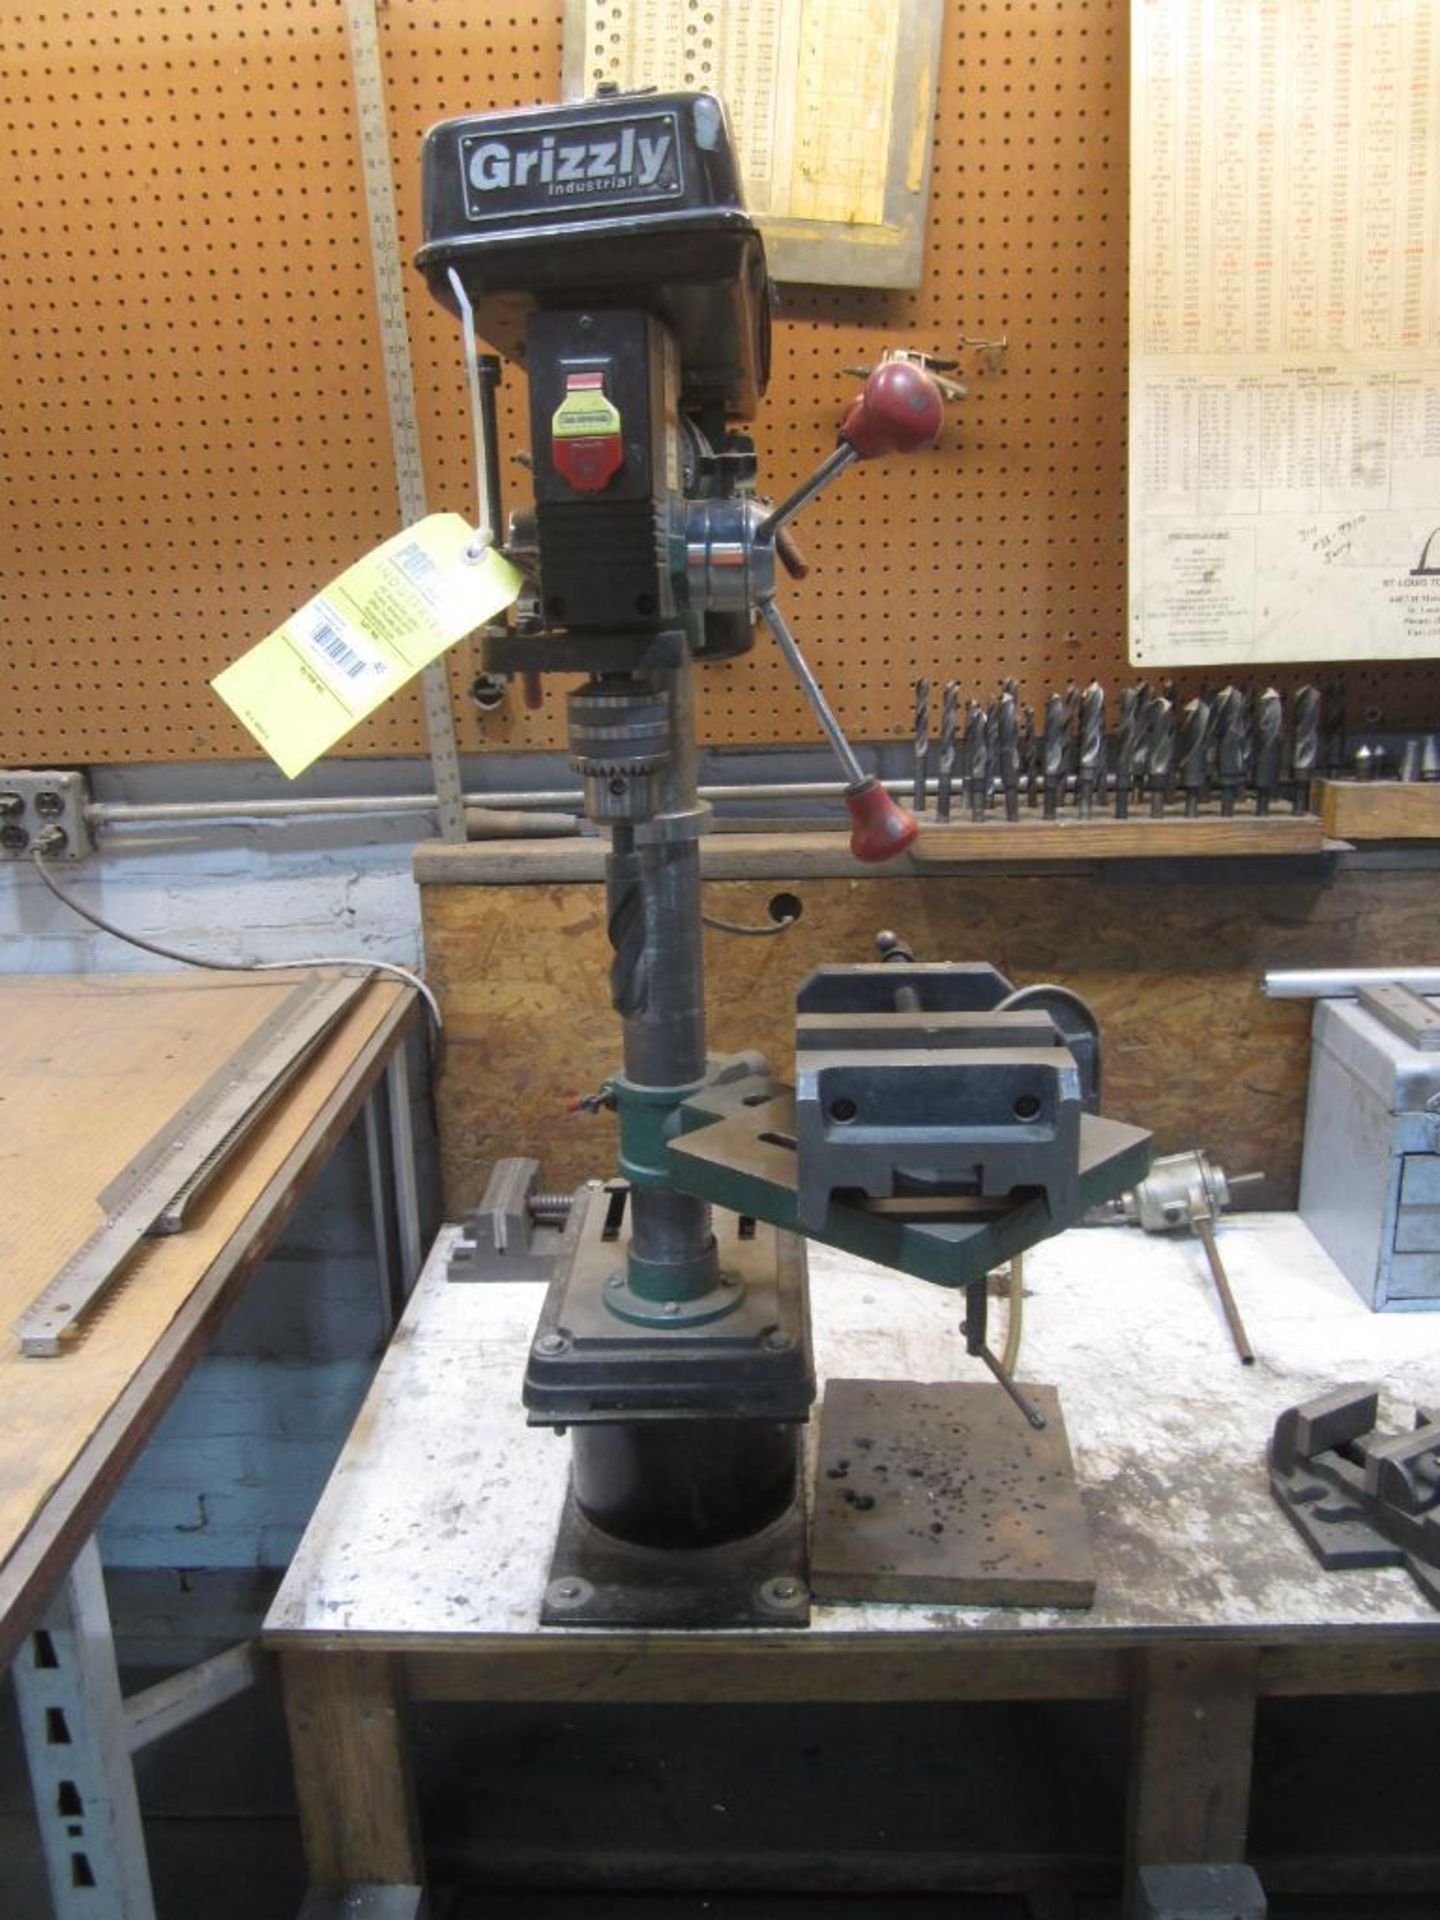 Grizzly work bench radial drill press